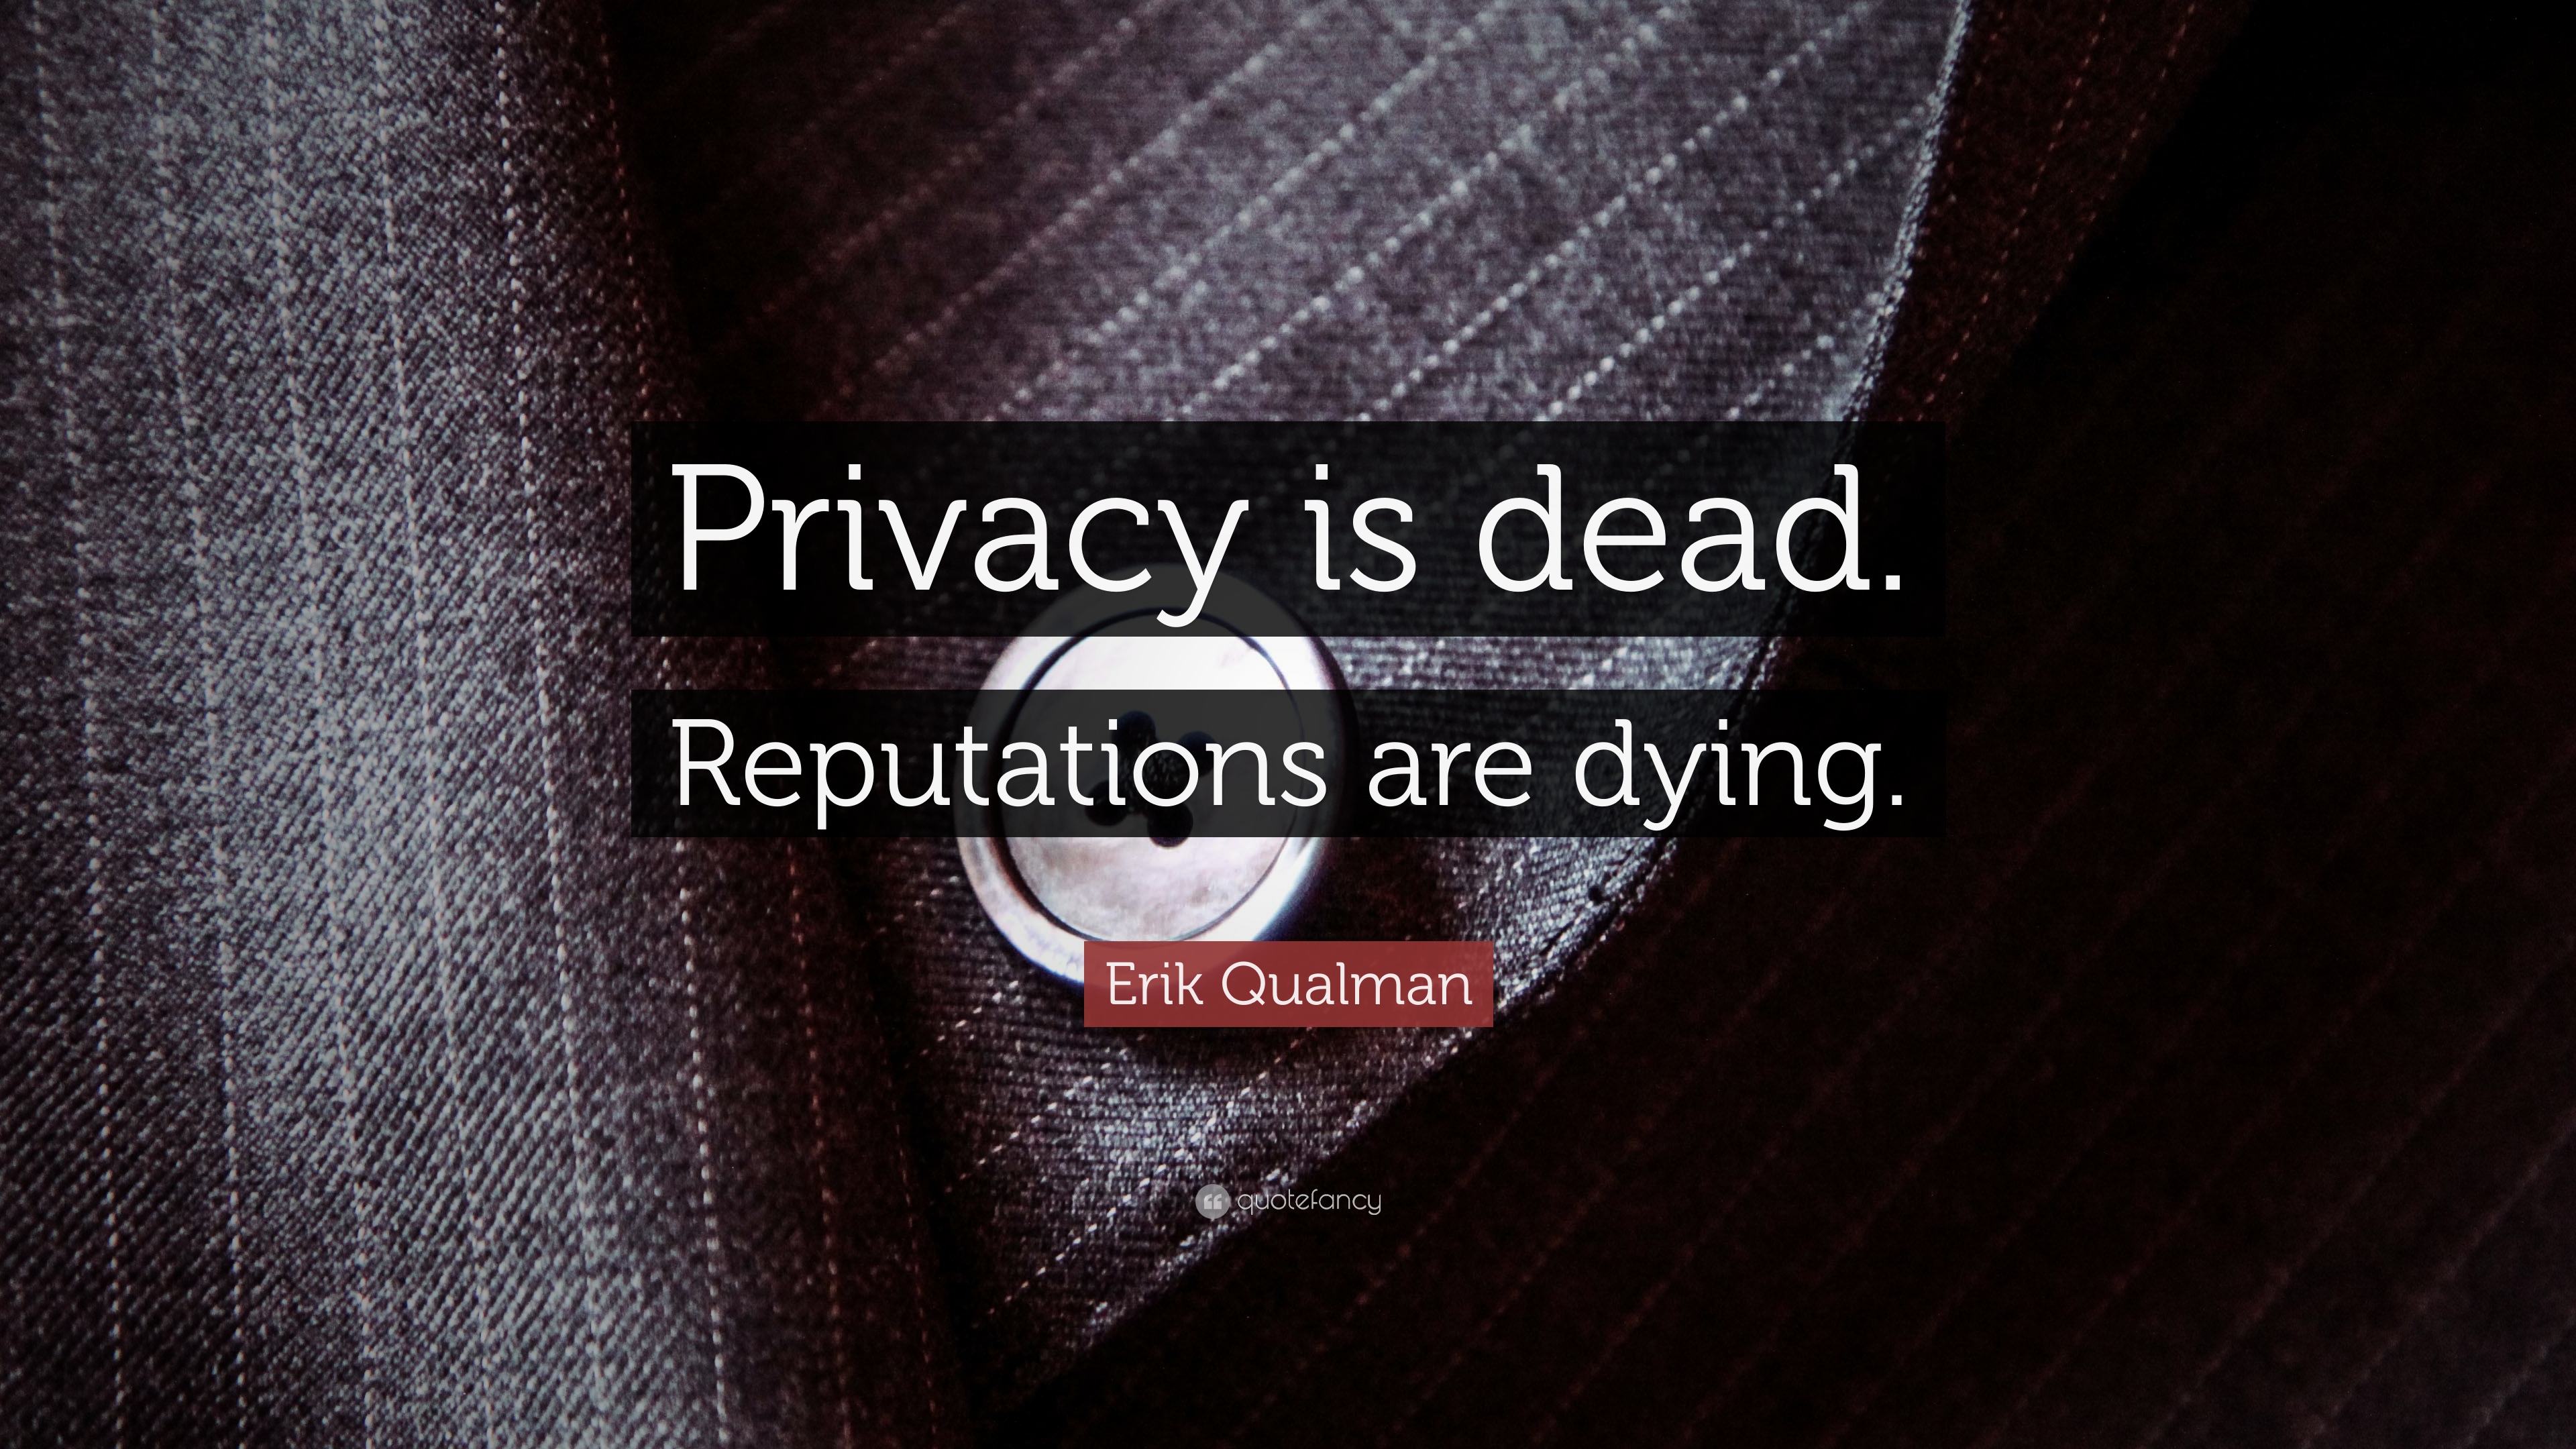 Erik Qualman Quote: “Privacy is dead. Reputations are dying.” 7